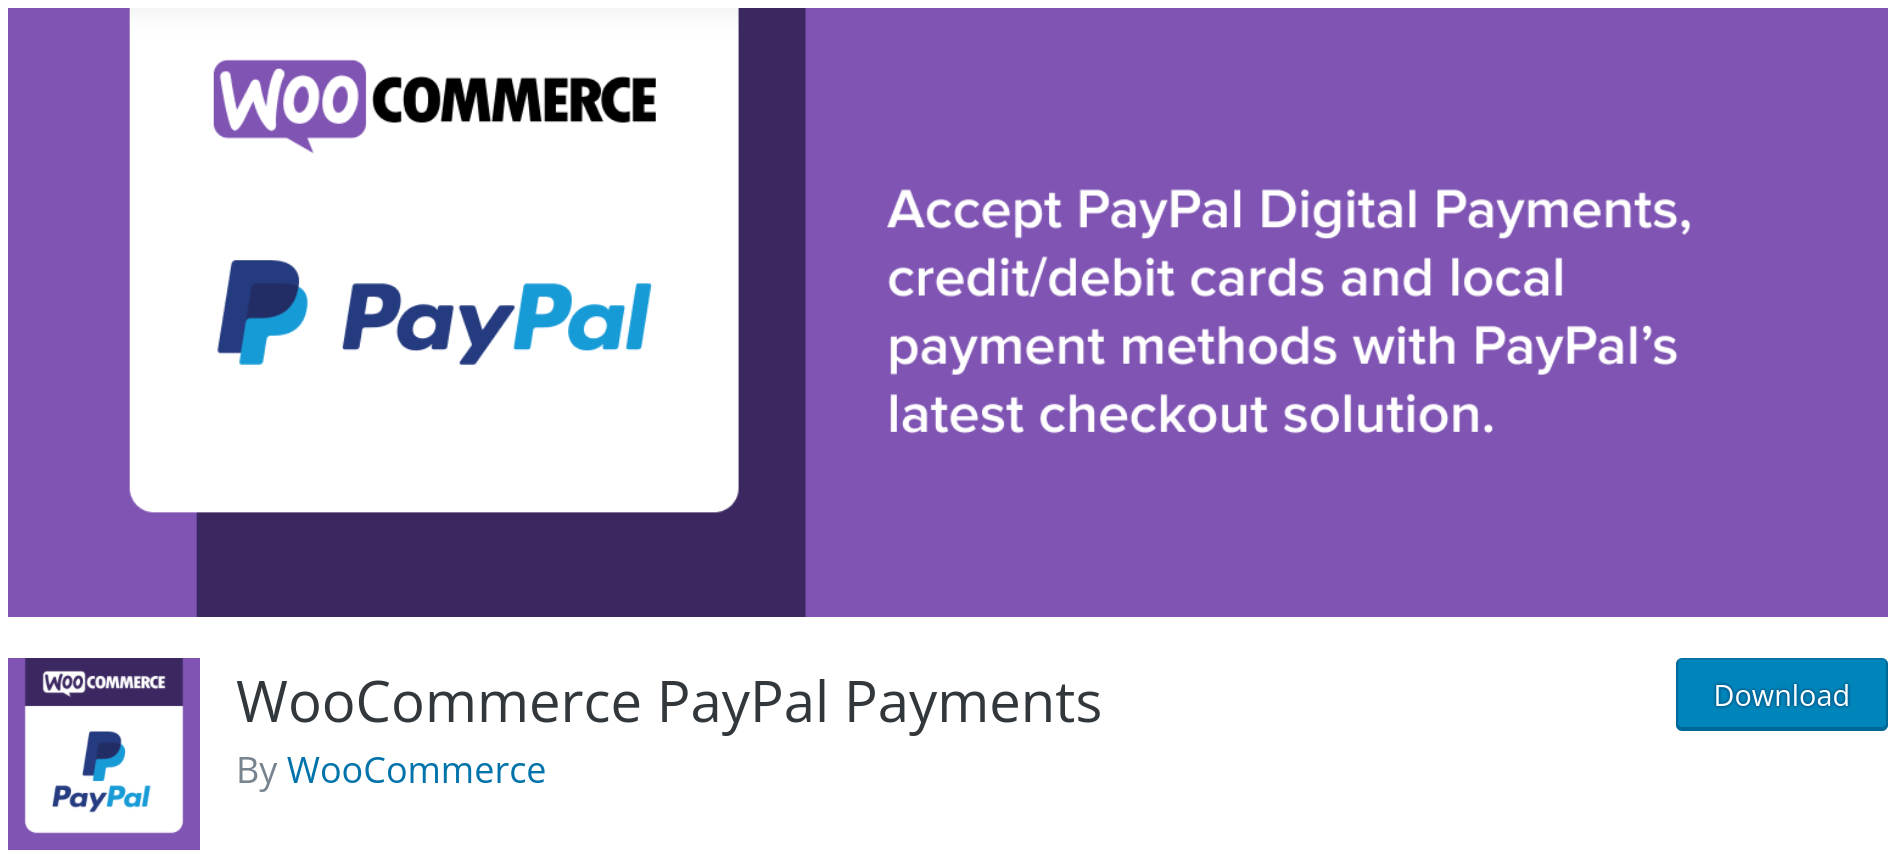 WooCommerce PayPal Payments 